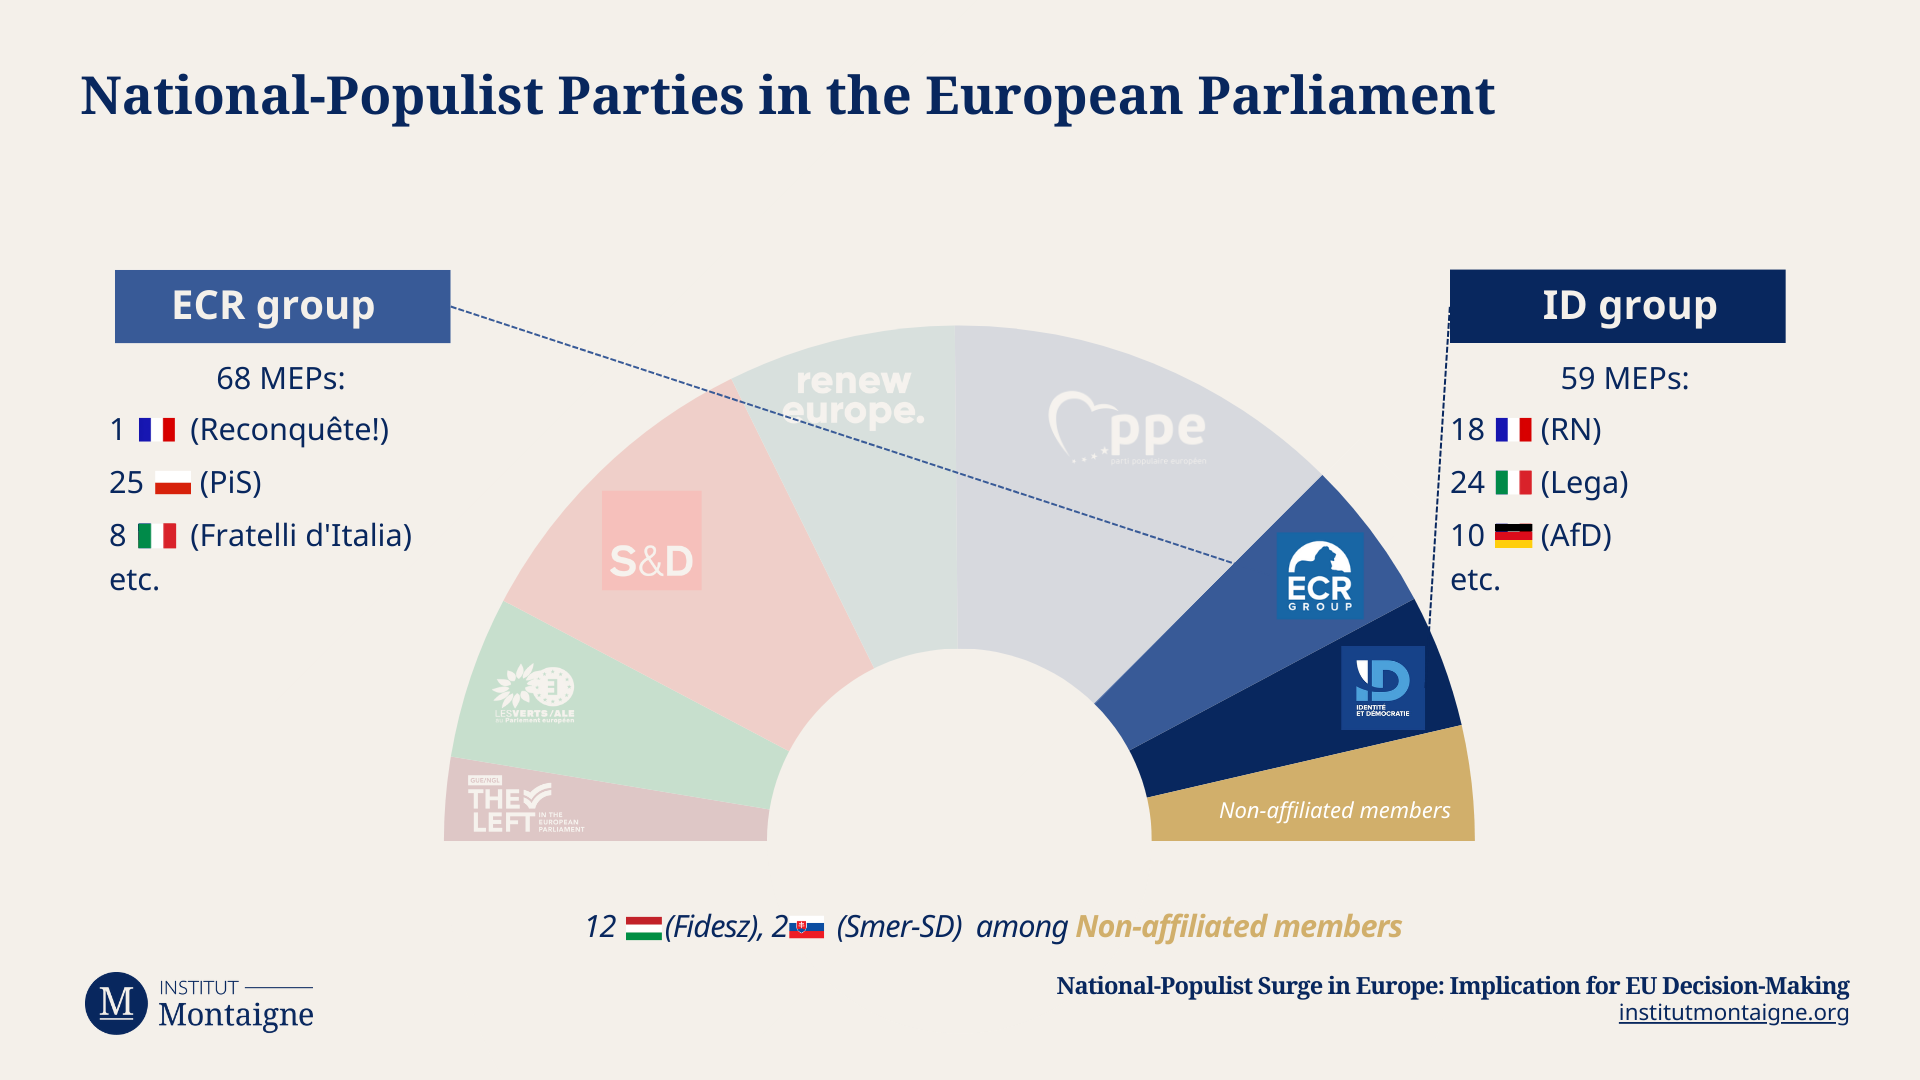 National-Populist Parties in the European Parliament